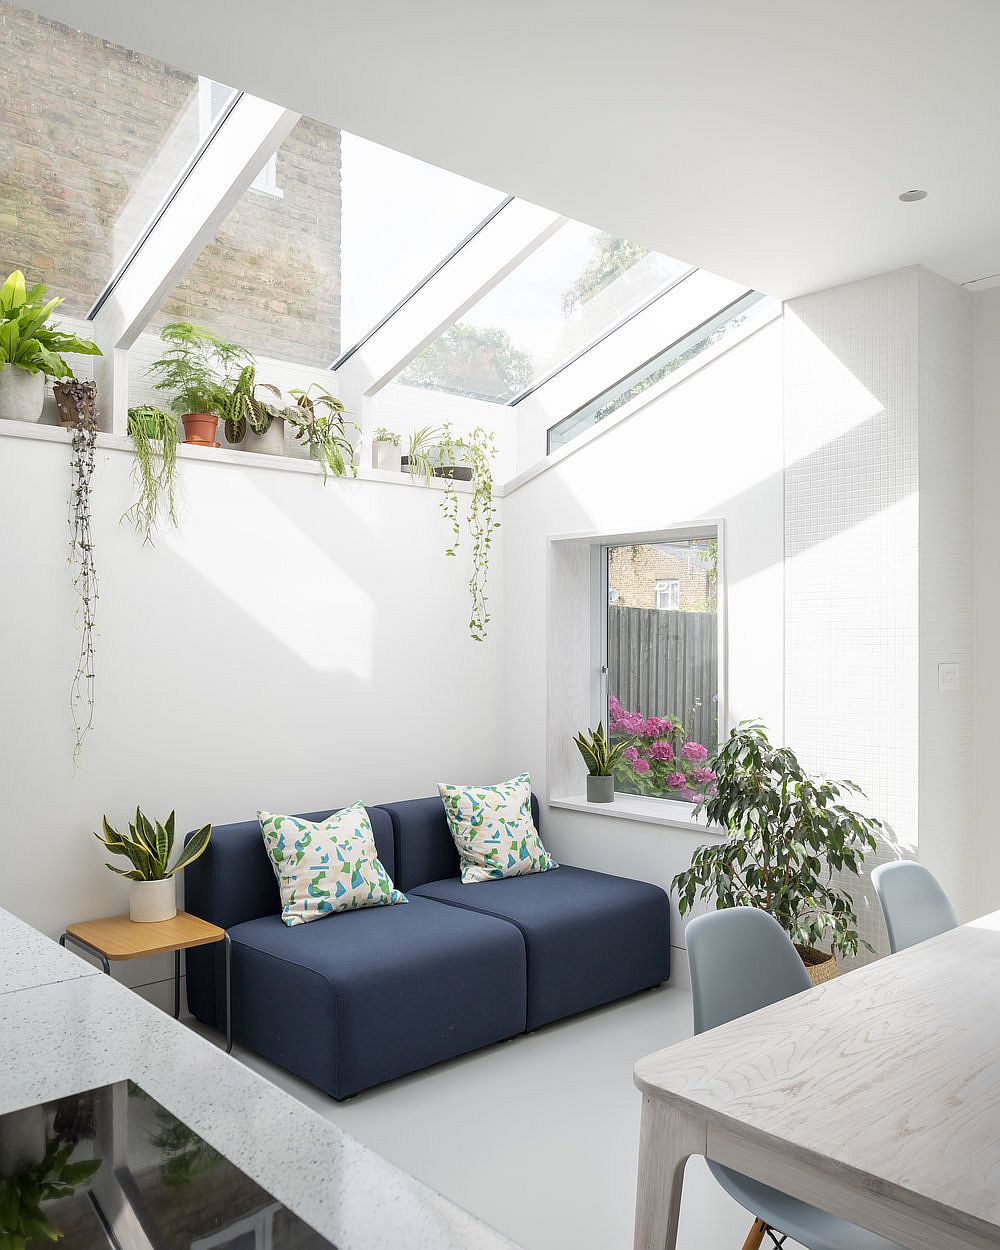 Using-the-skylight-to-bring-ventilation-into-the-modern-rear-extension-25309